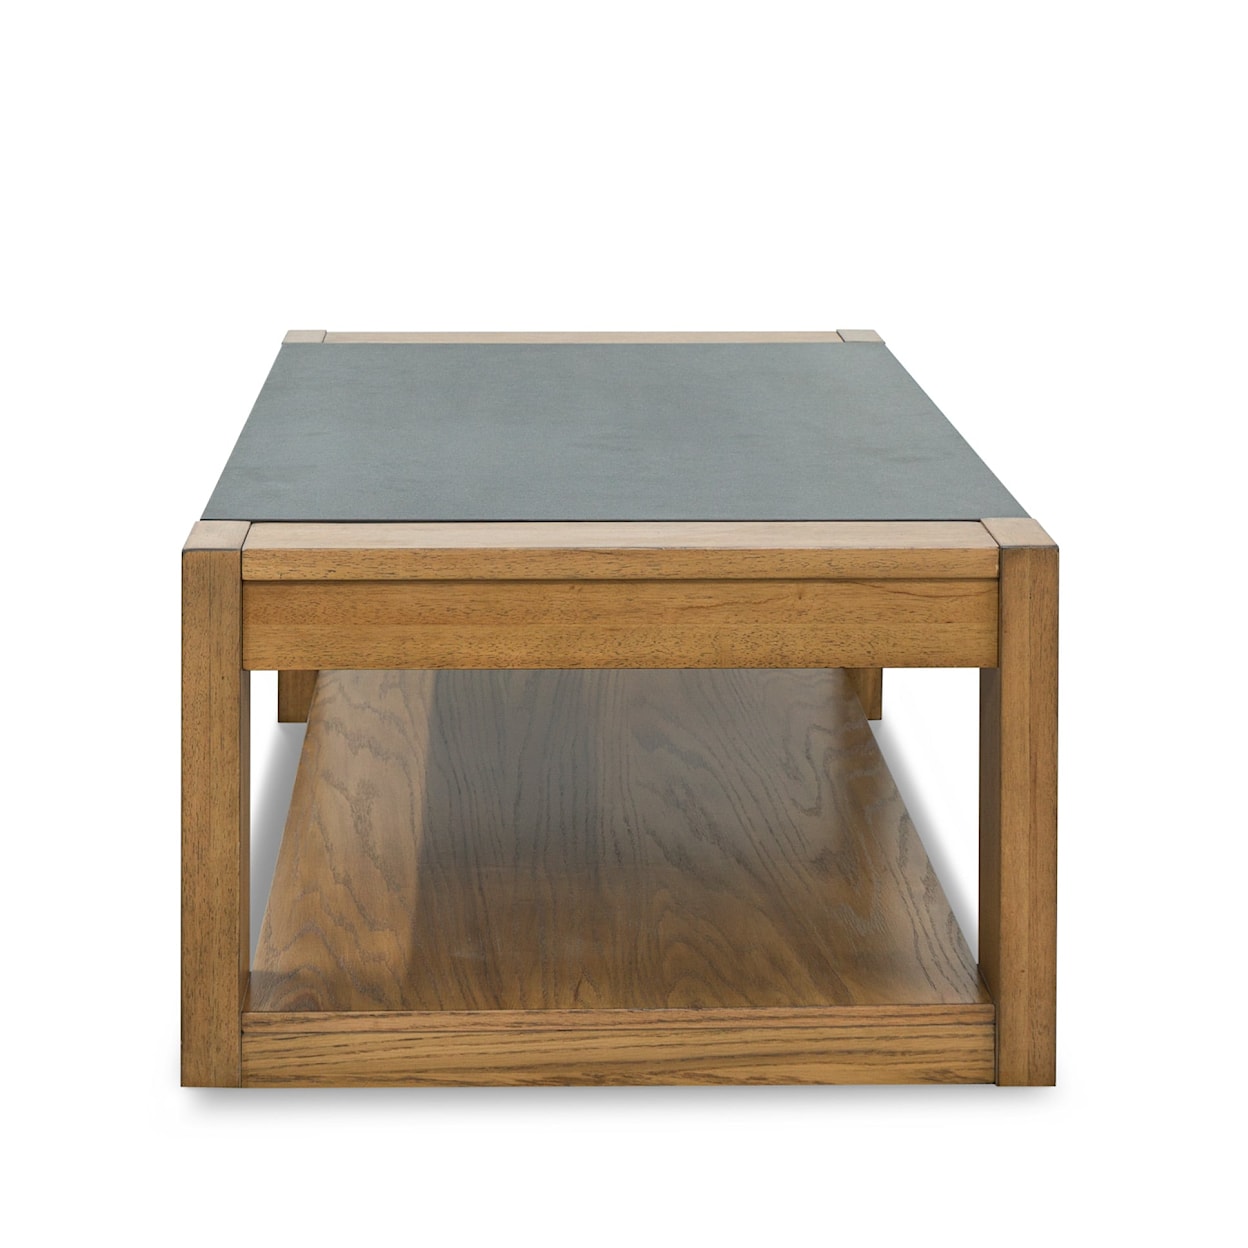 Benchcraft Quentina Lift Top Coffee Table